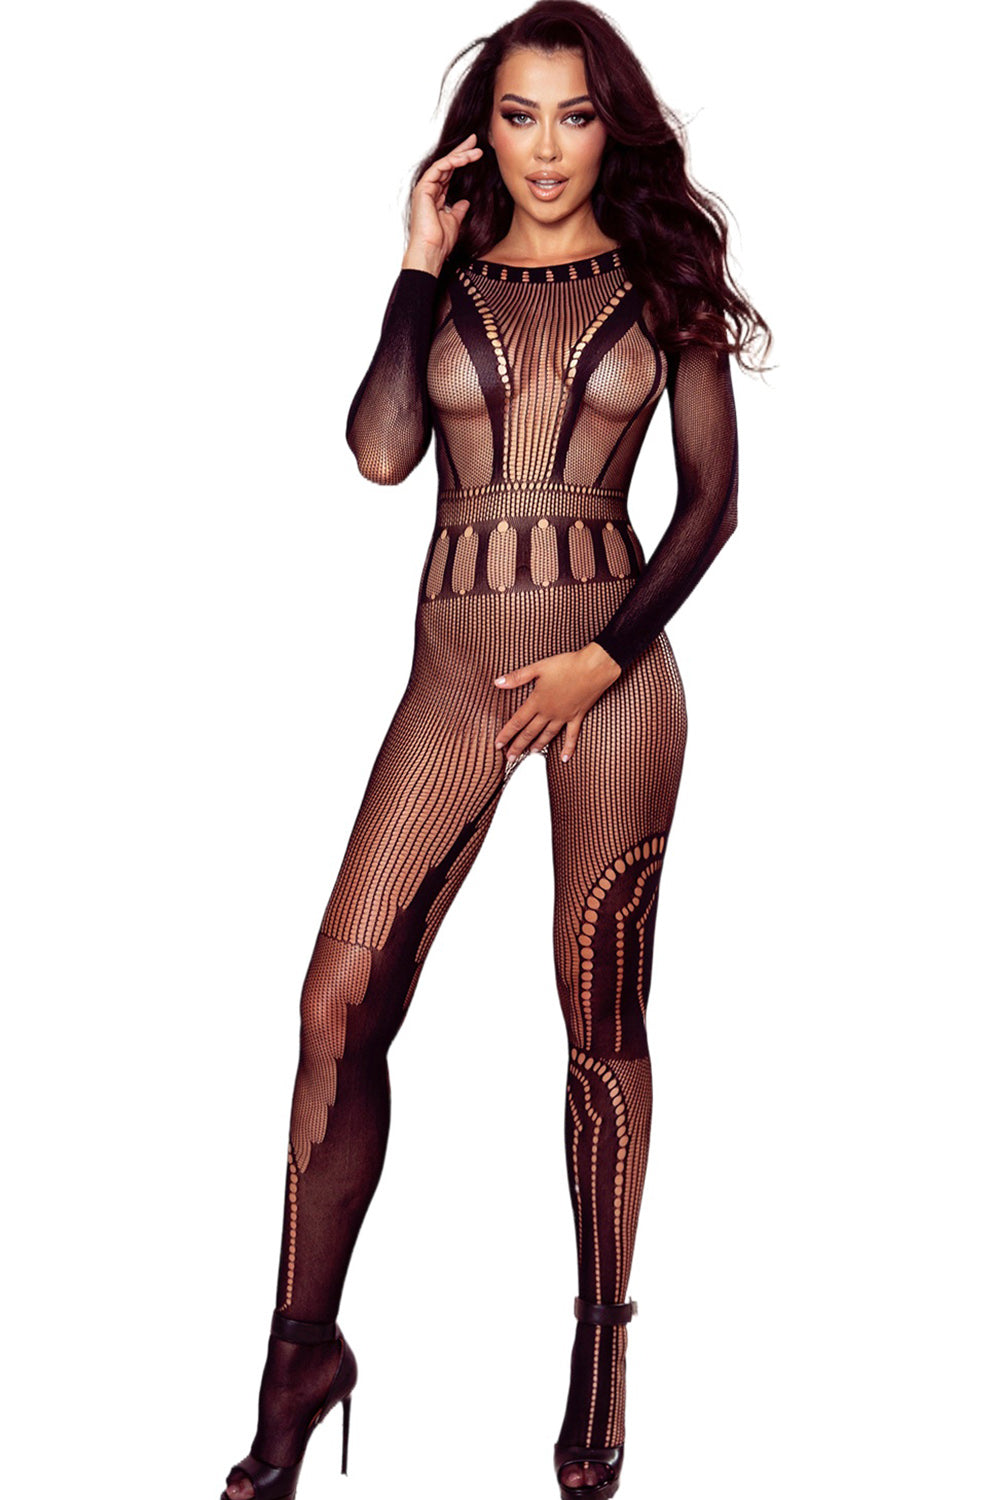 Black Hollow-out Long Sleeve Body Stocking